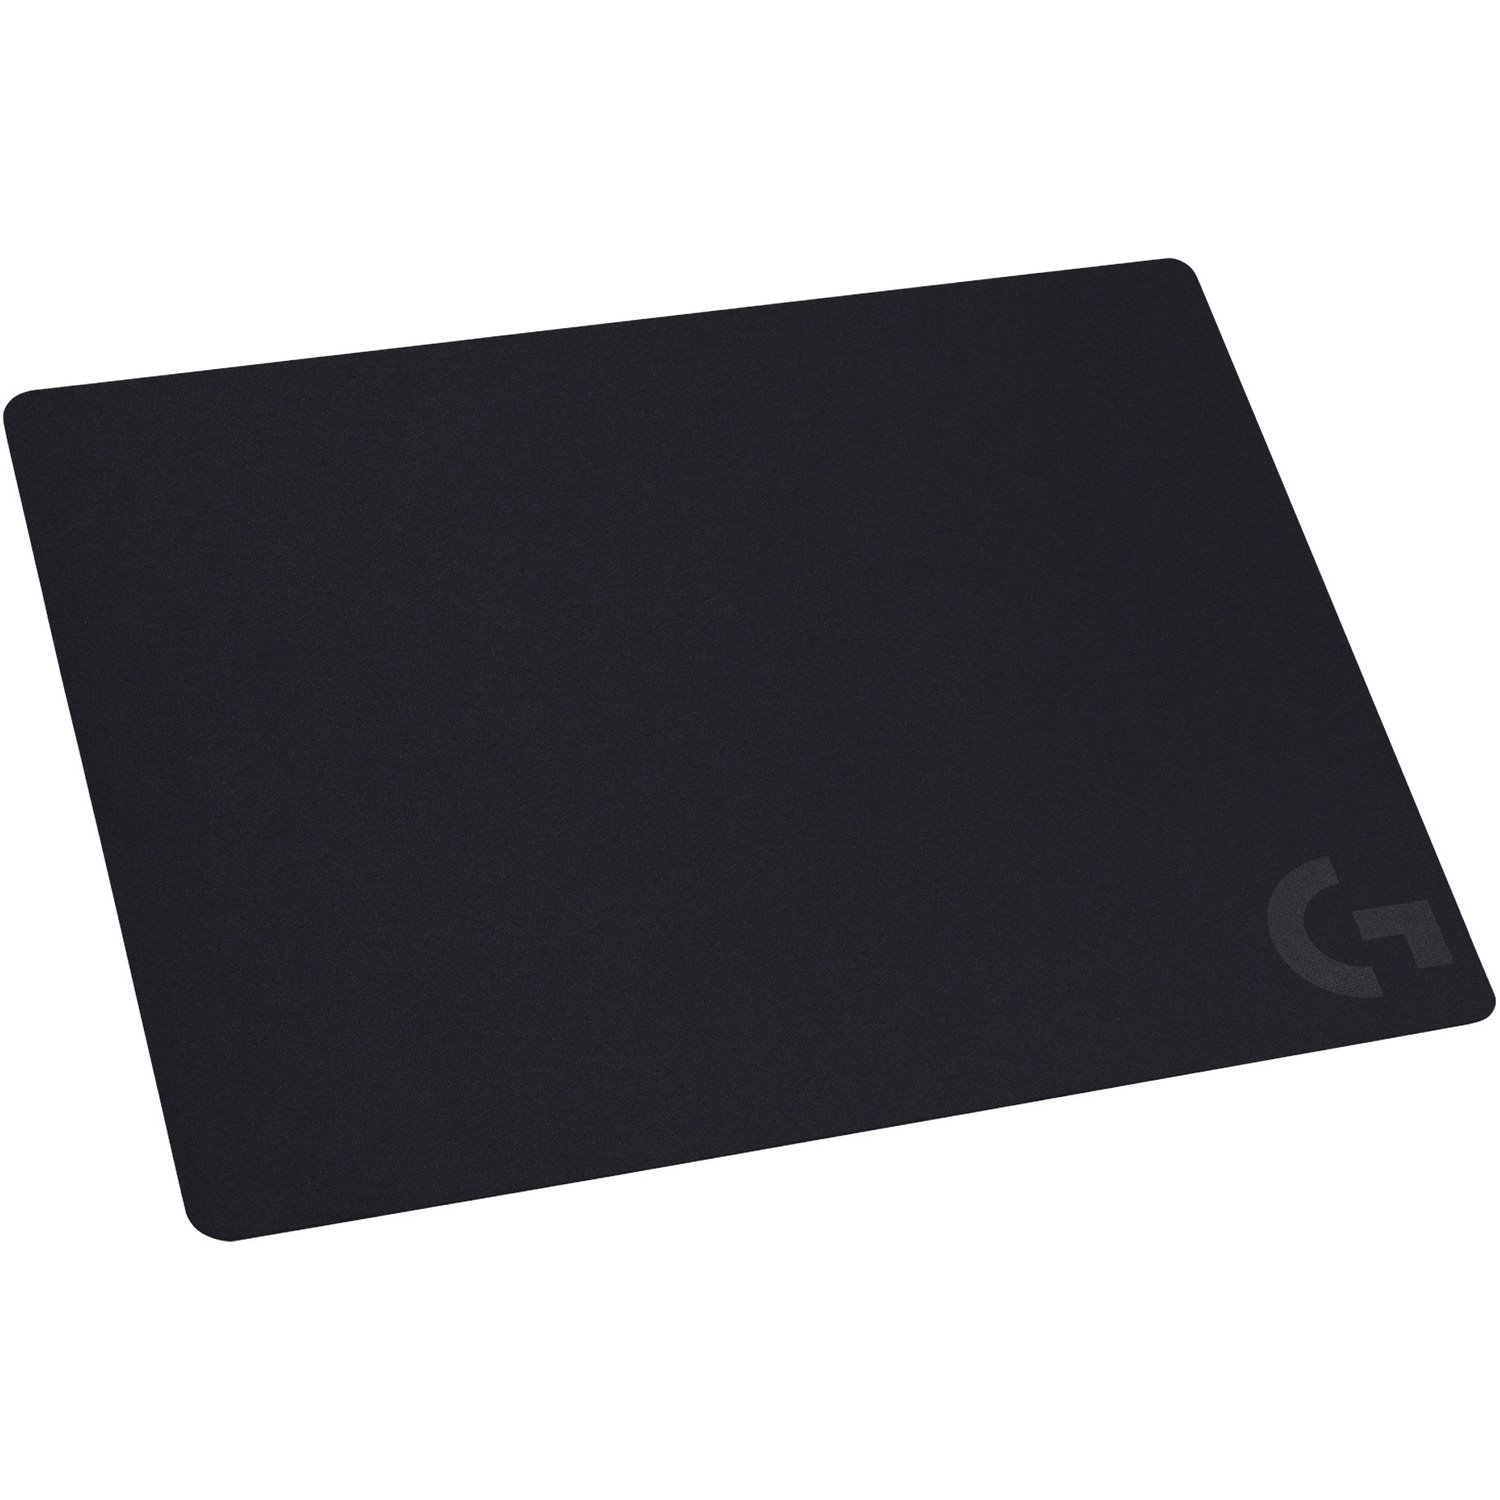 Logitech G Cloth Gaming Mouse Pad